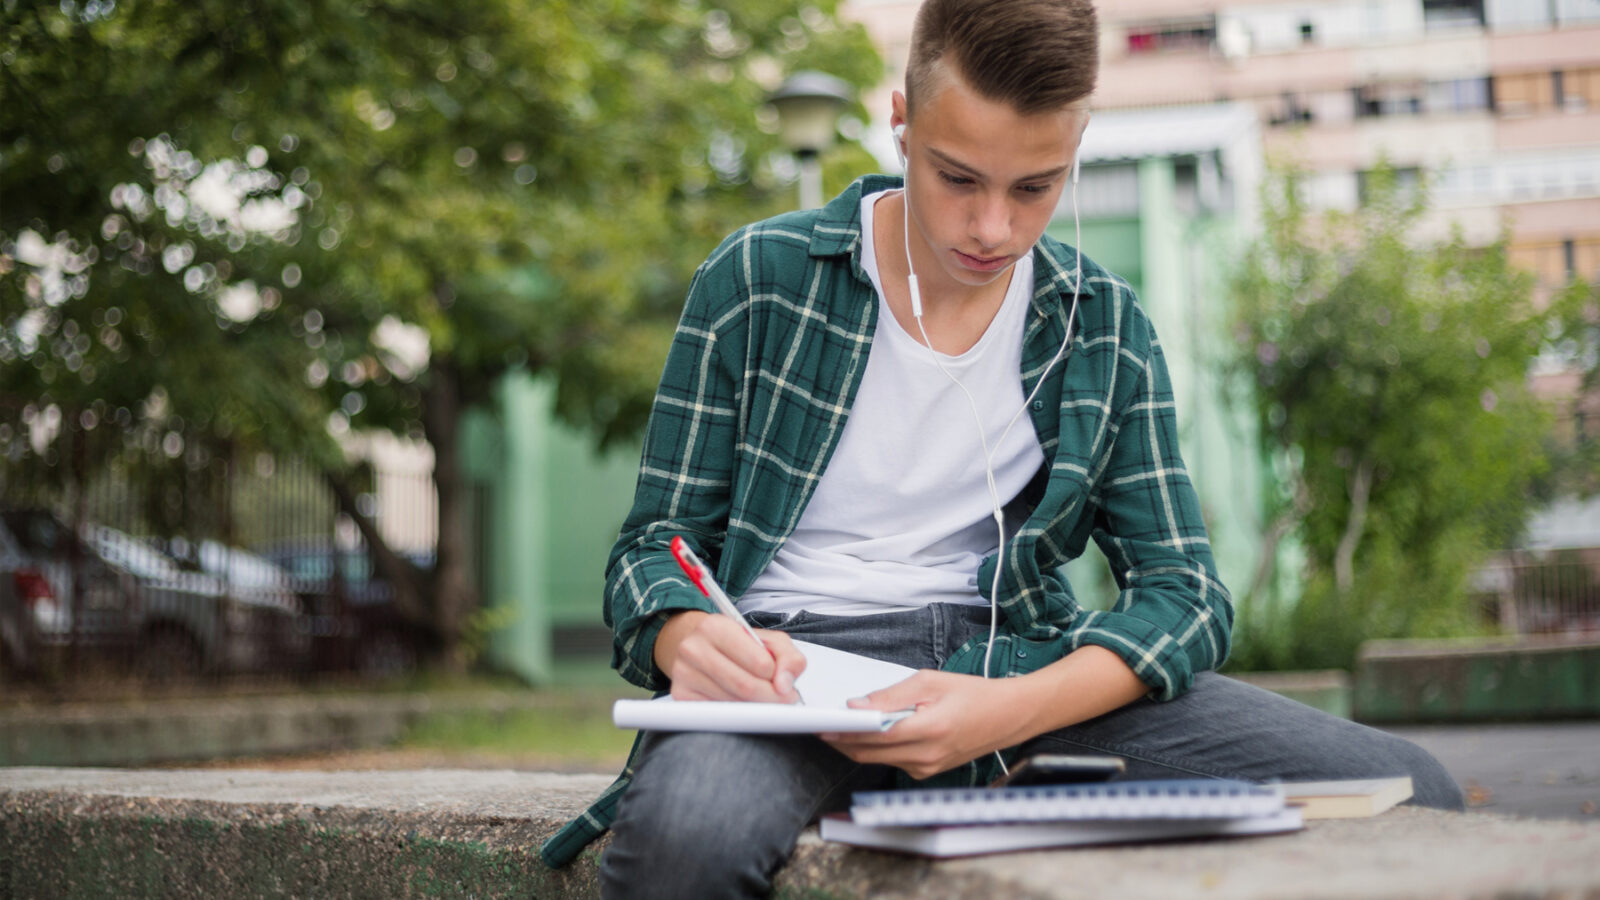 Teenage boy writes in a notebook while listening to music